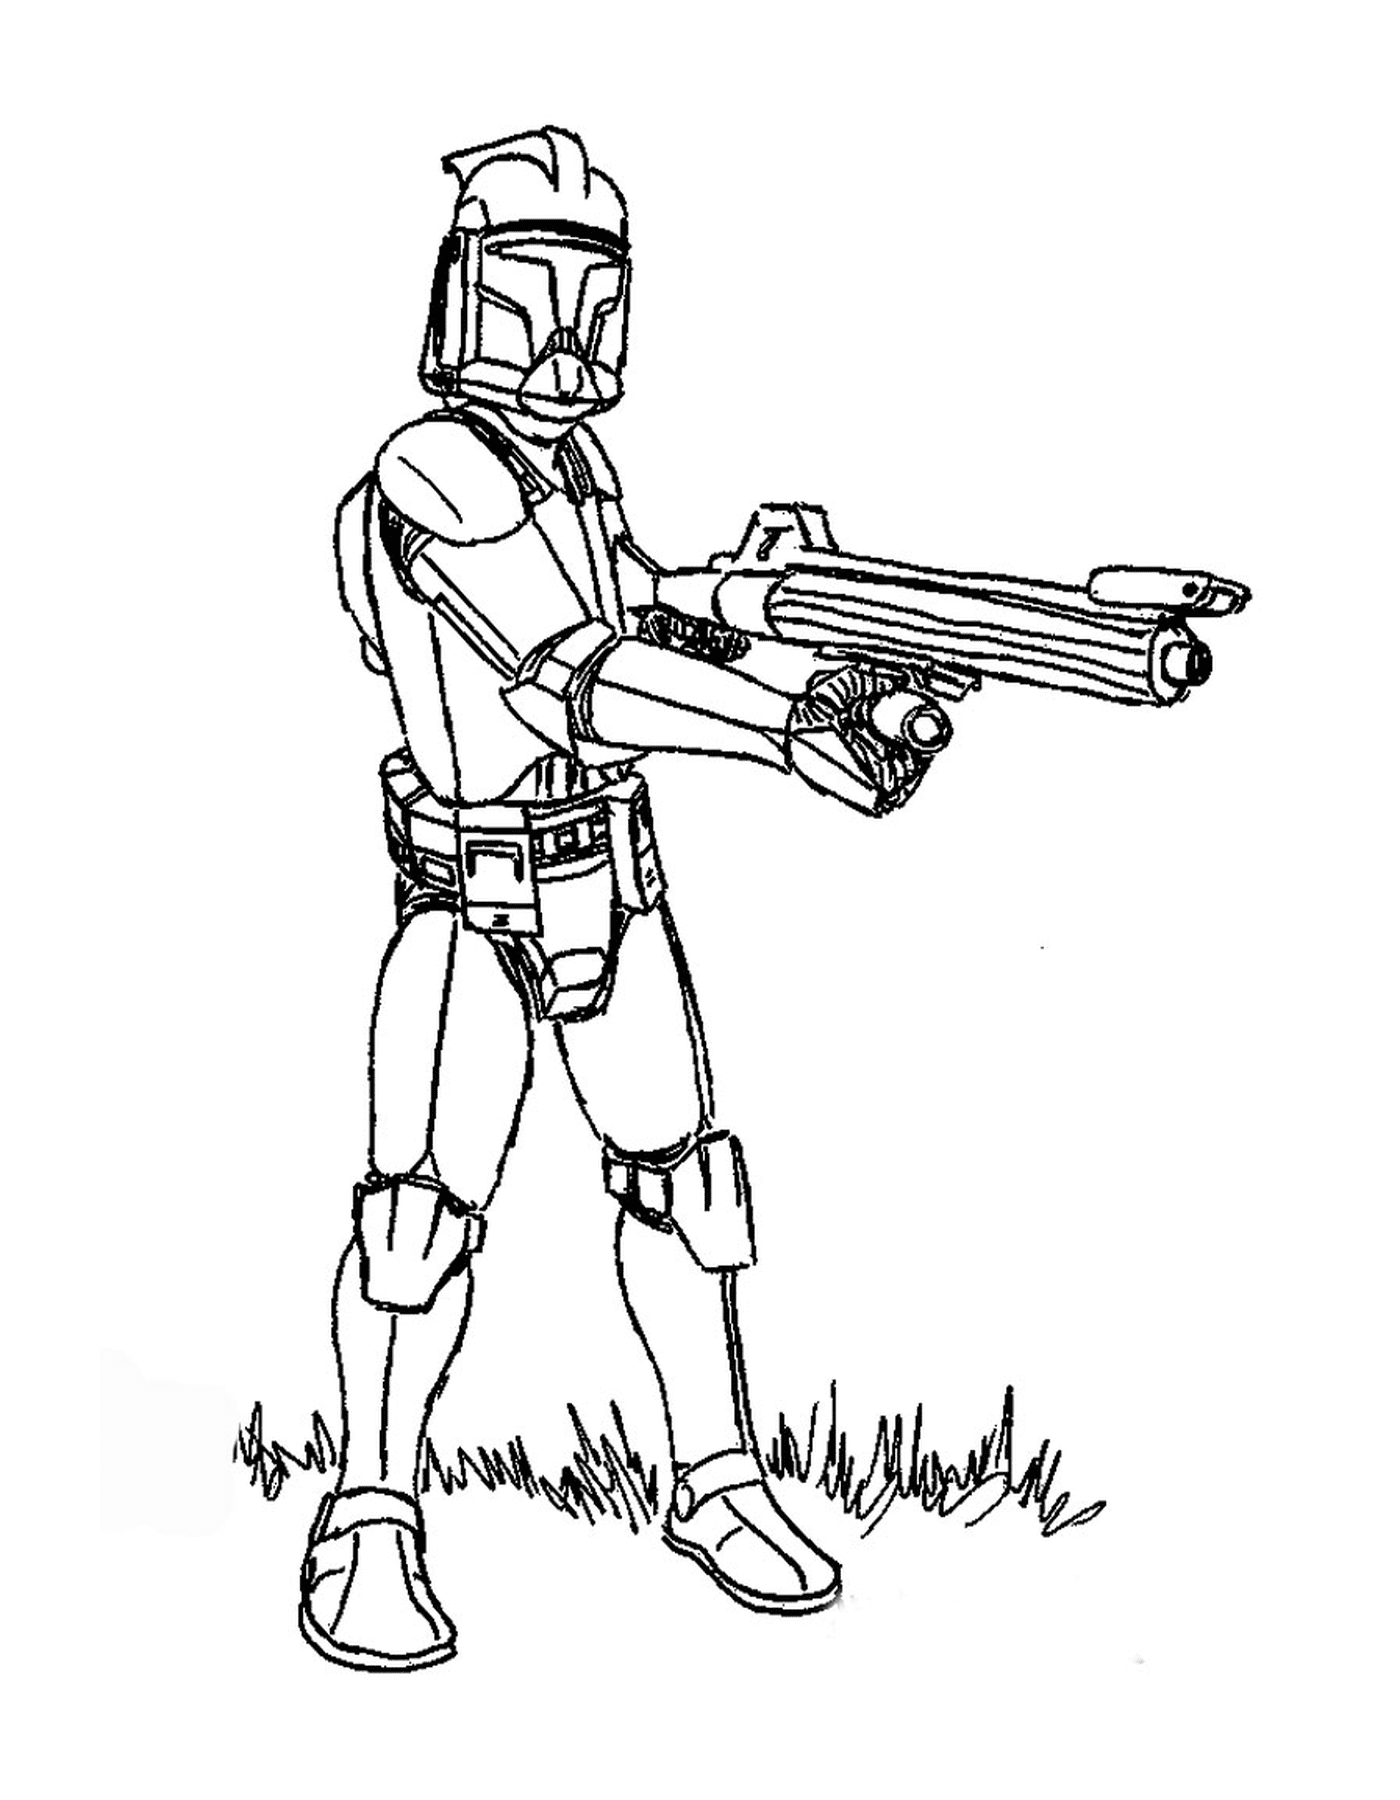  Star Wars character with a gun 